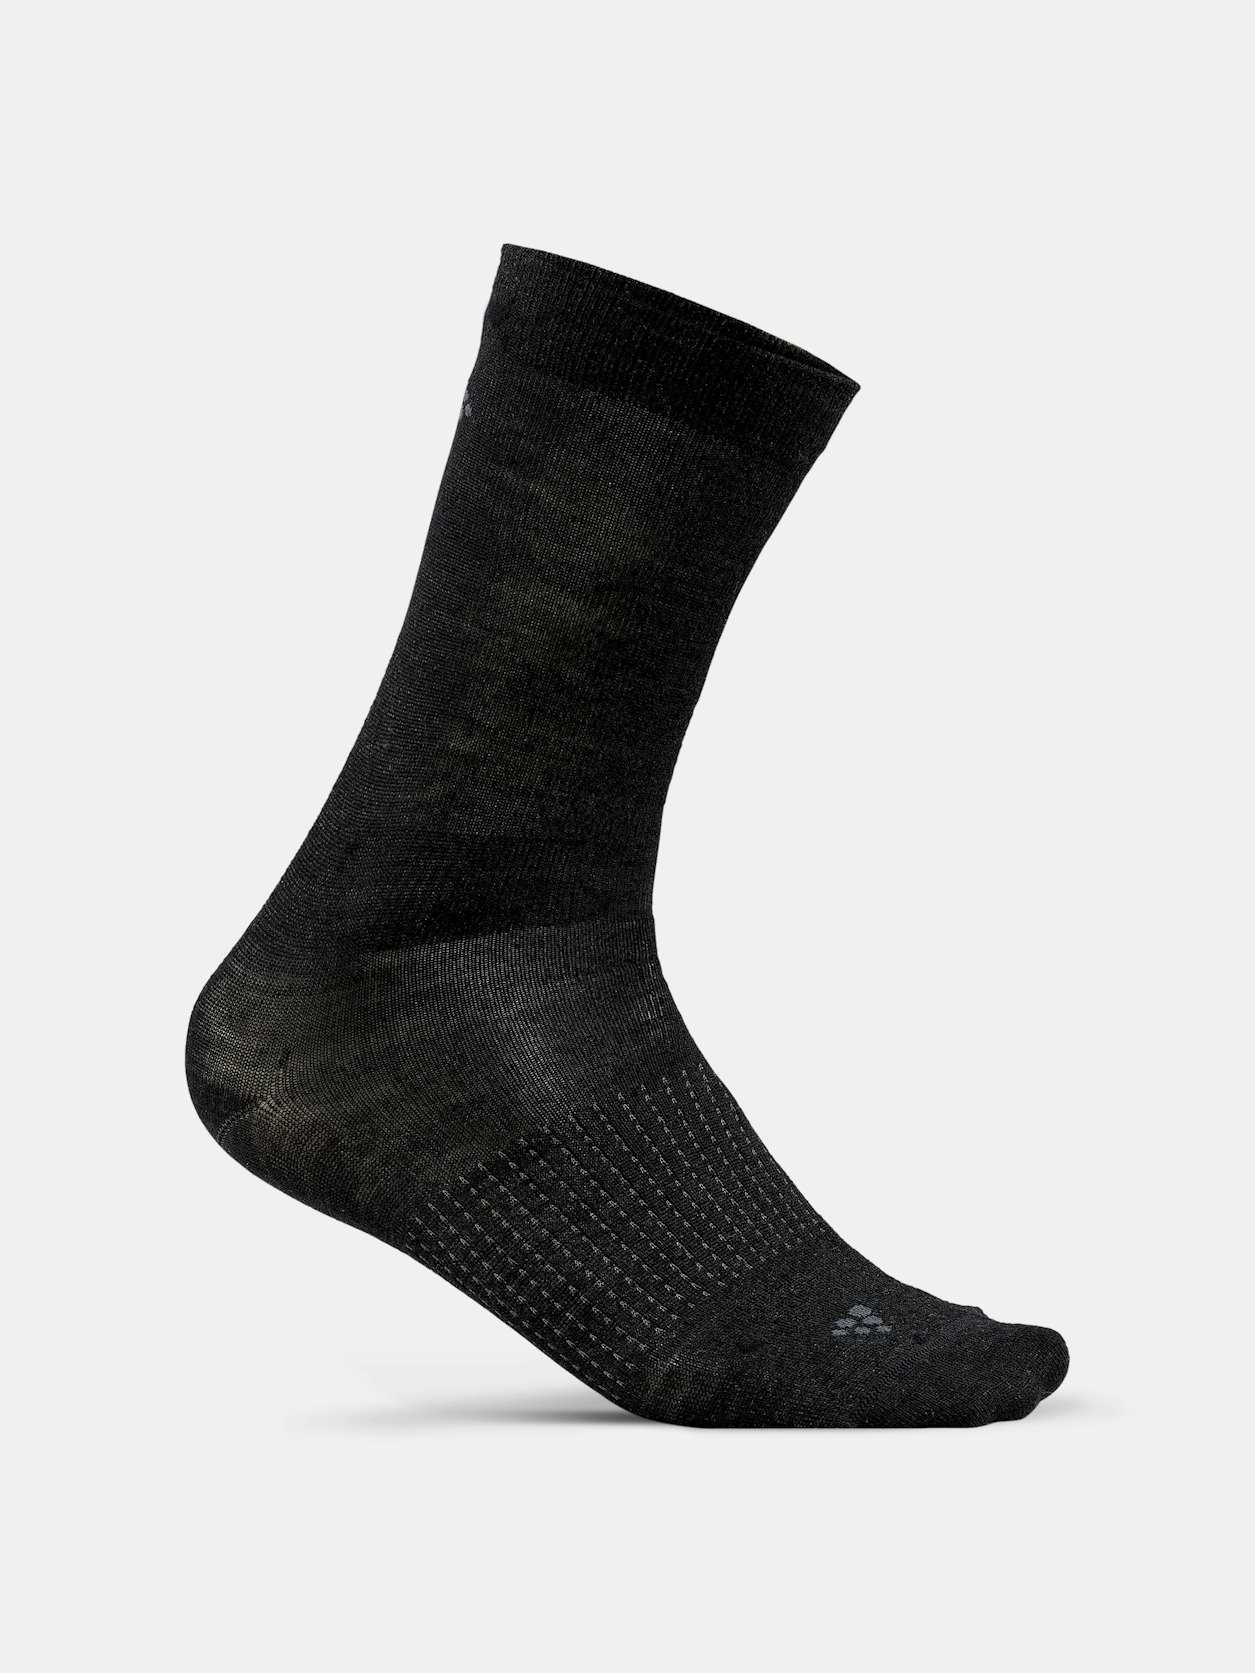 Sockliner In A Shoe – The Ultimate Guide